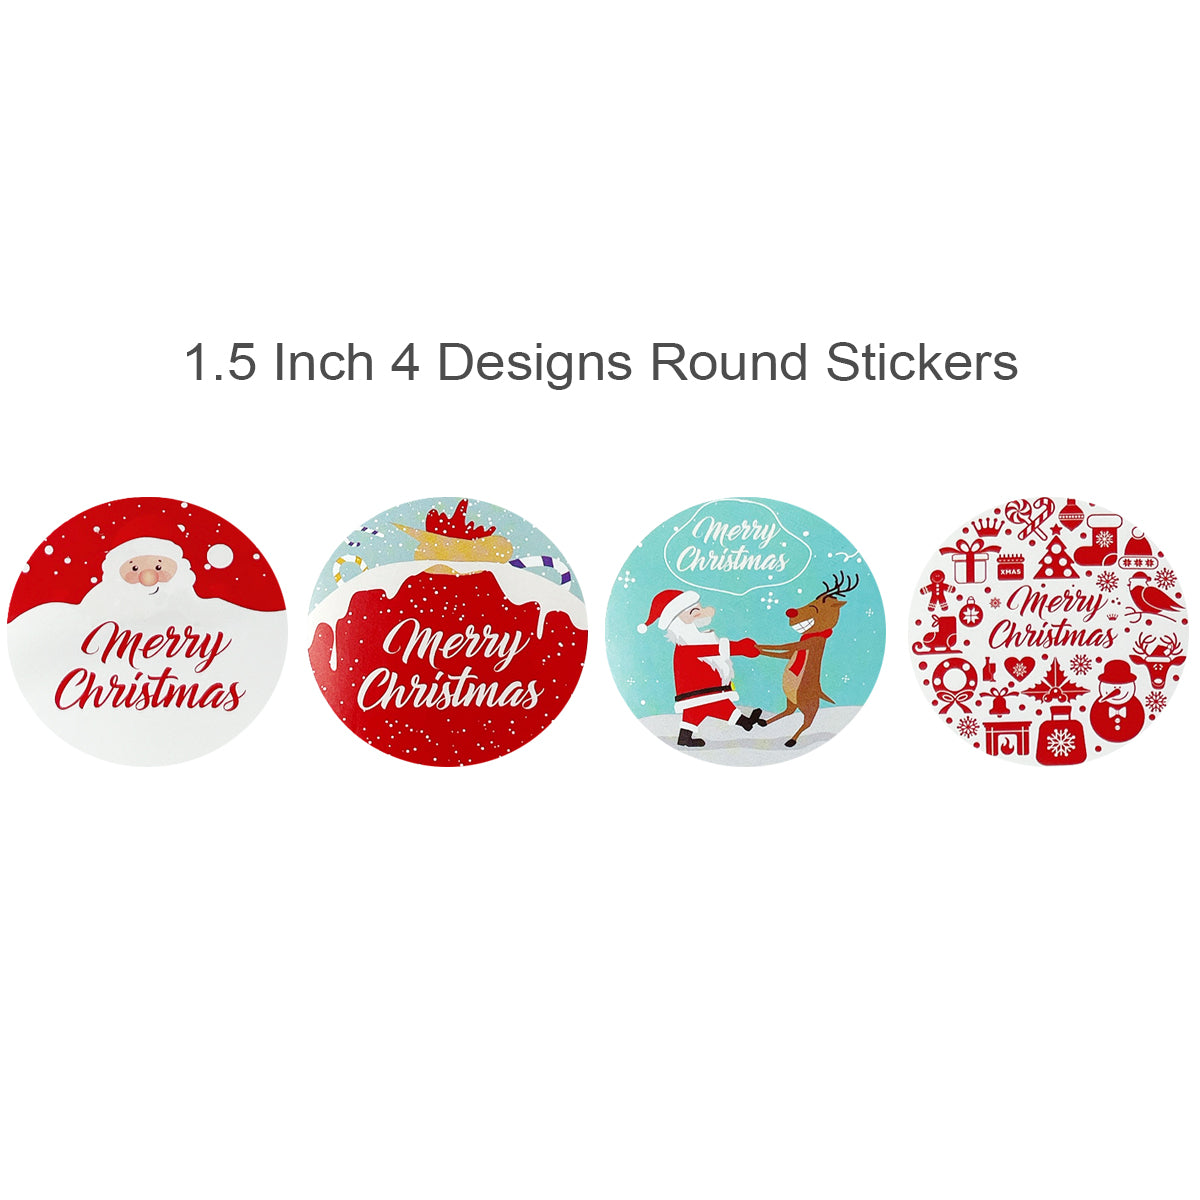 Wrapables Christmas Stickers Label Roll, Holiday Stickers for Sealing Cards, Envelopes, Gift Boxes, Festive Party Favors (500 Pcs) Reindeer & Santa